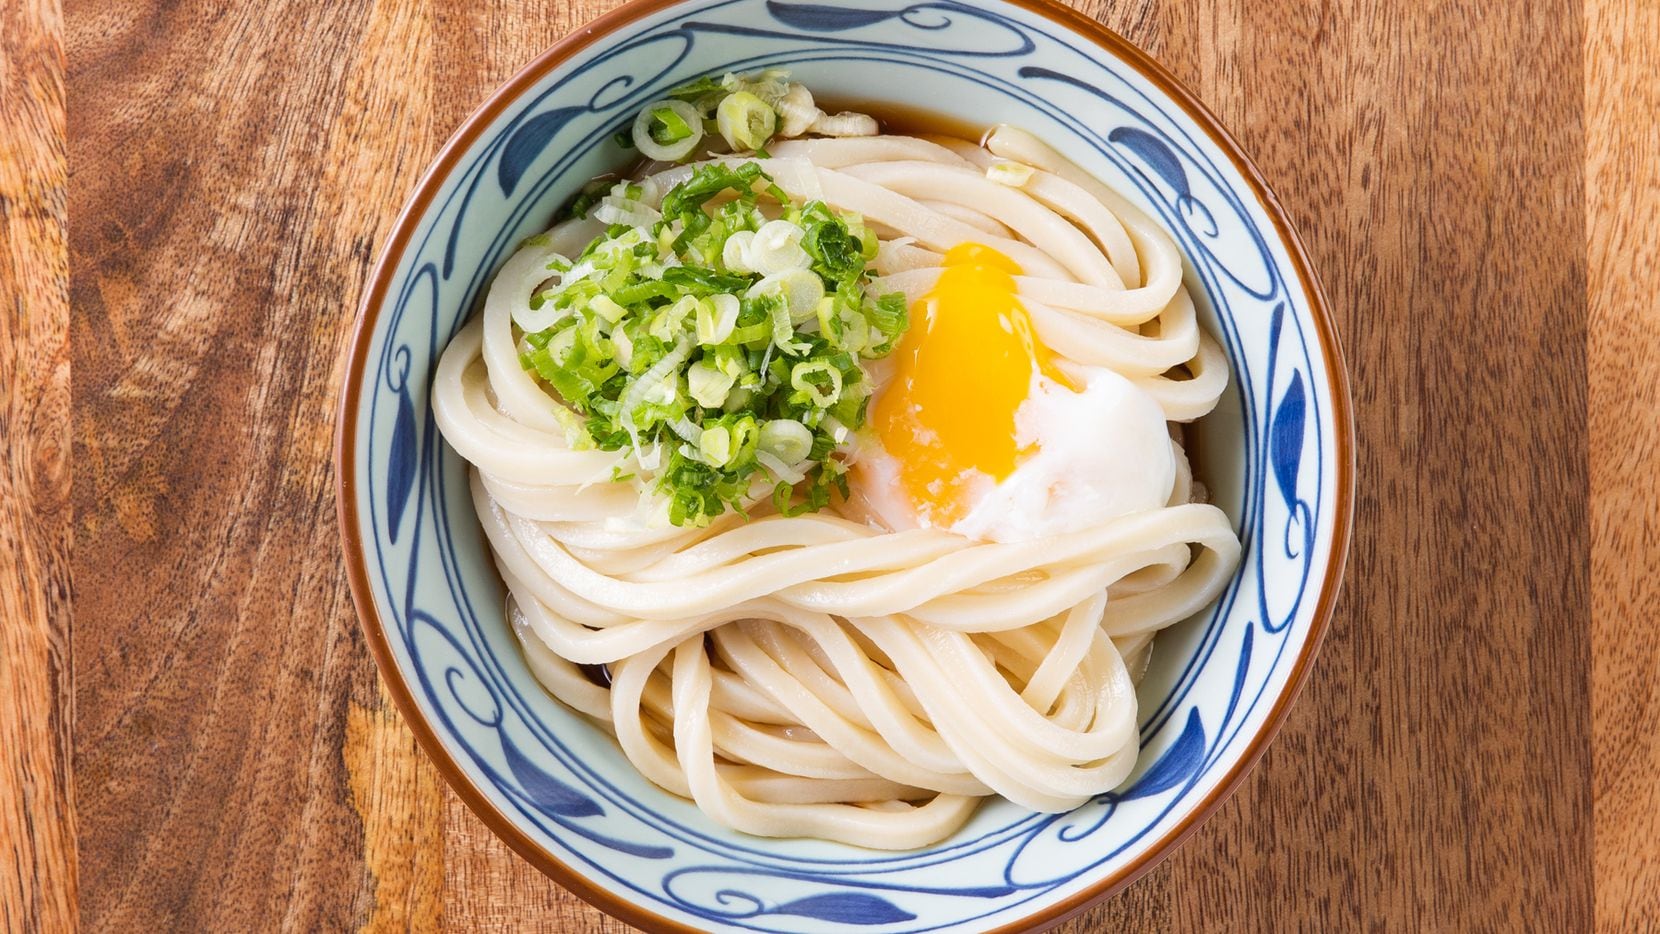 Celebrate Tsukimi, Japan's harvest moon festival, with a $5 udon